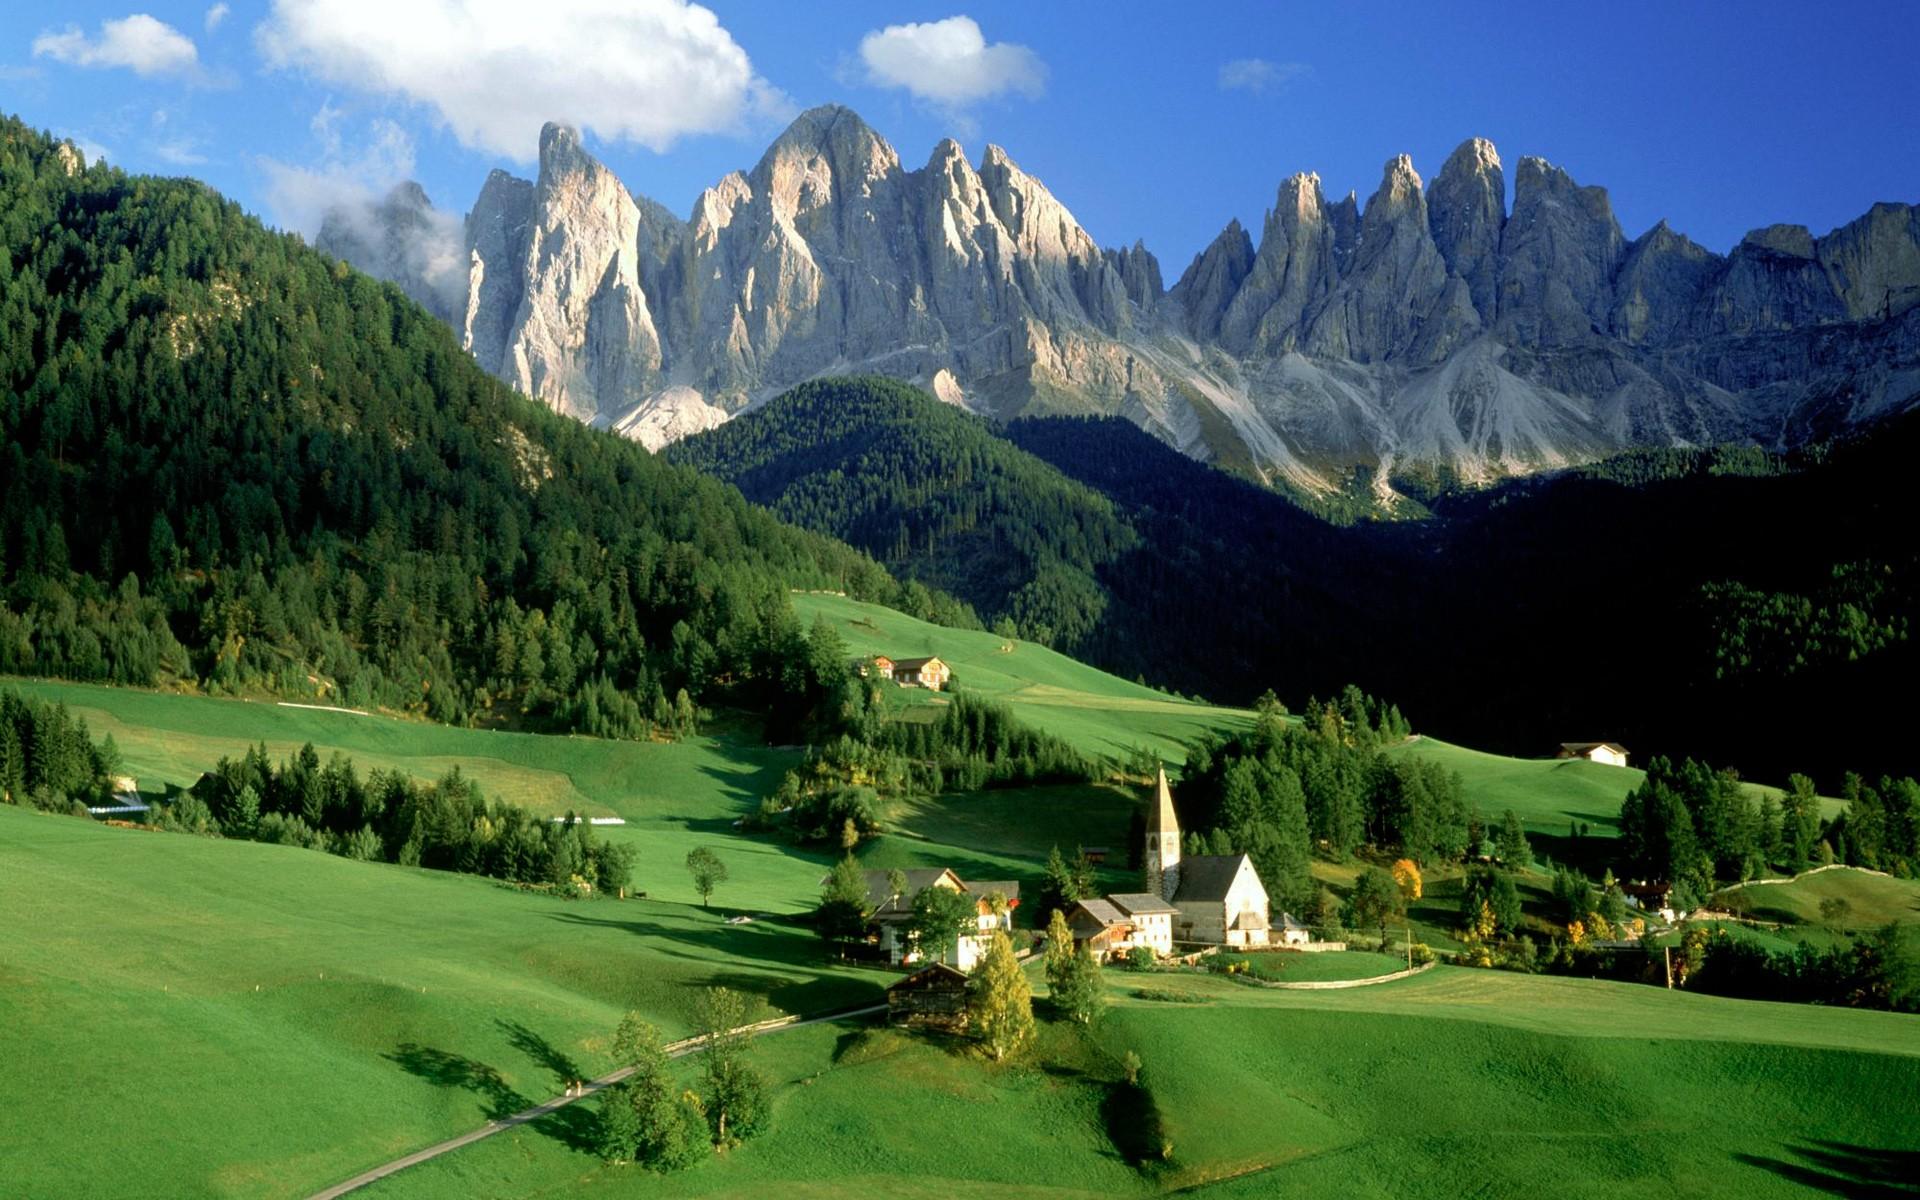 South Tyrol Valley, Italy widescreen wallpaper. Wide